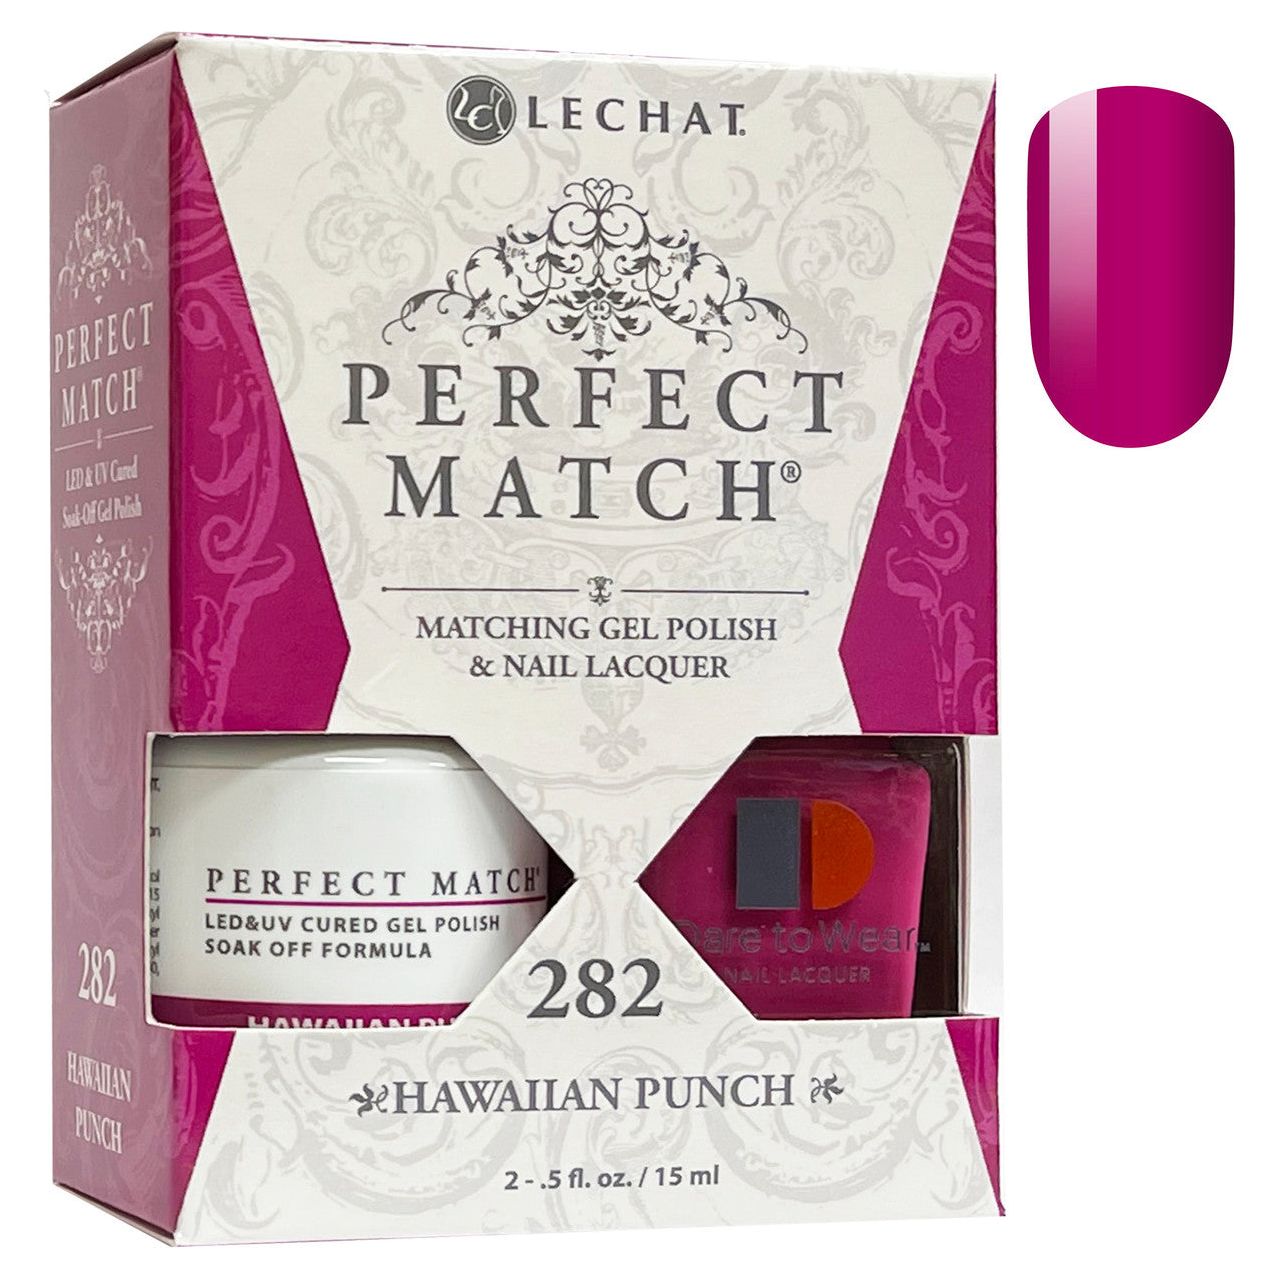 LeChat Perfect Match Gel + Matching Lacquer Hawaiian Punch #282 (Clearance)